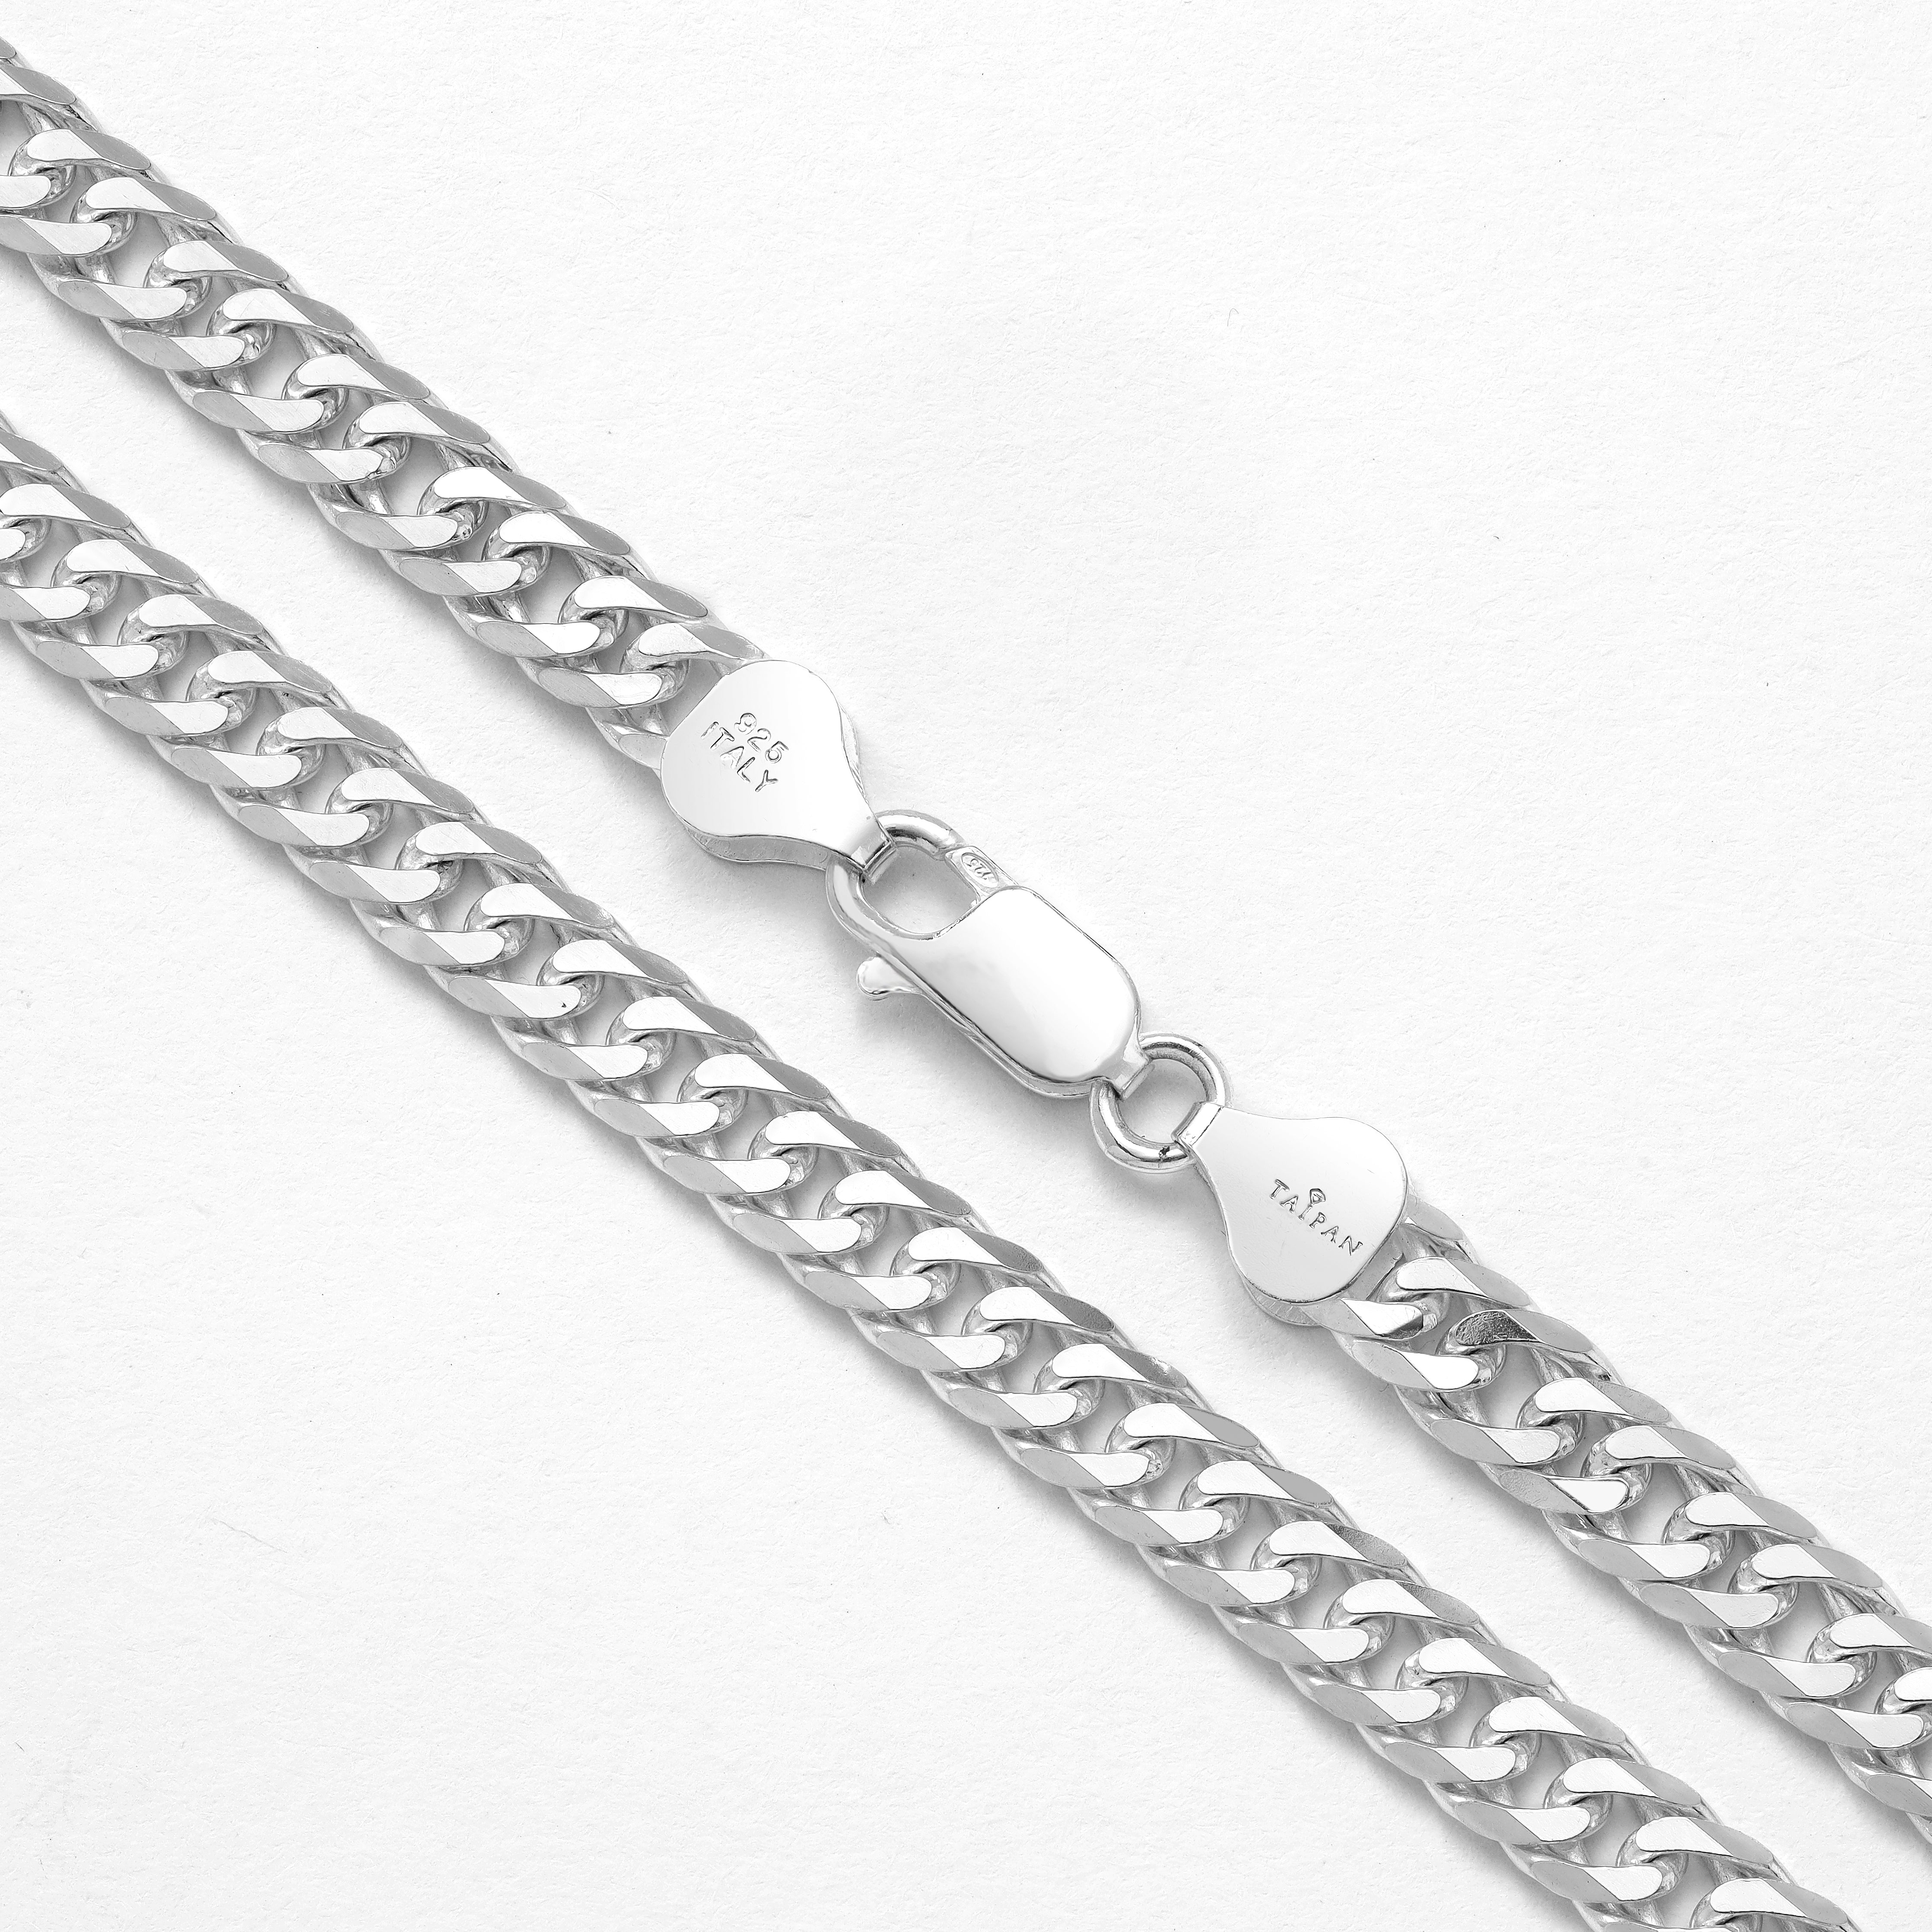 Double curb chain 6mm - 925 silver